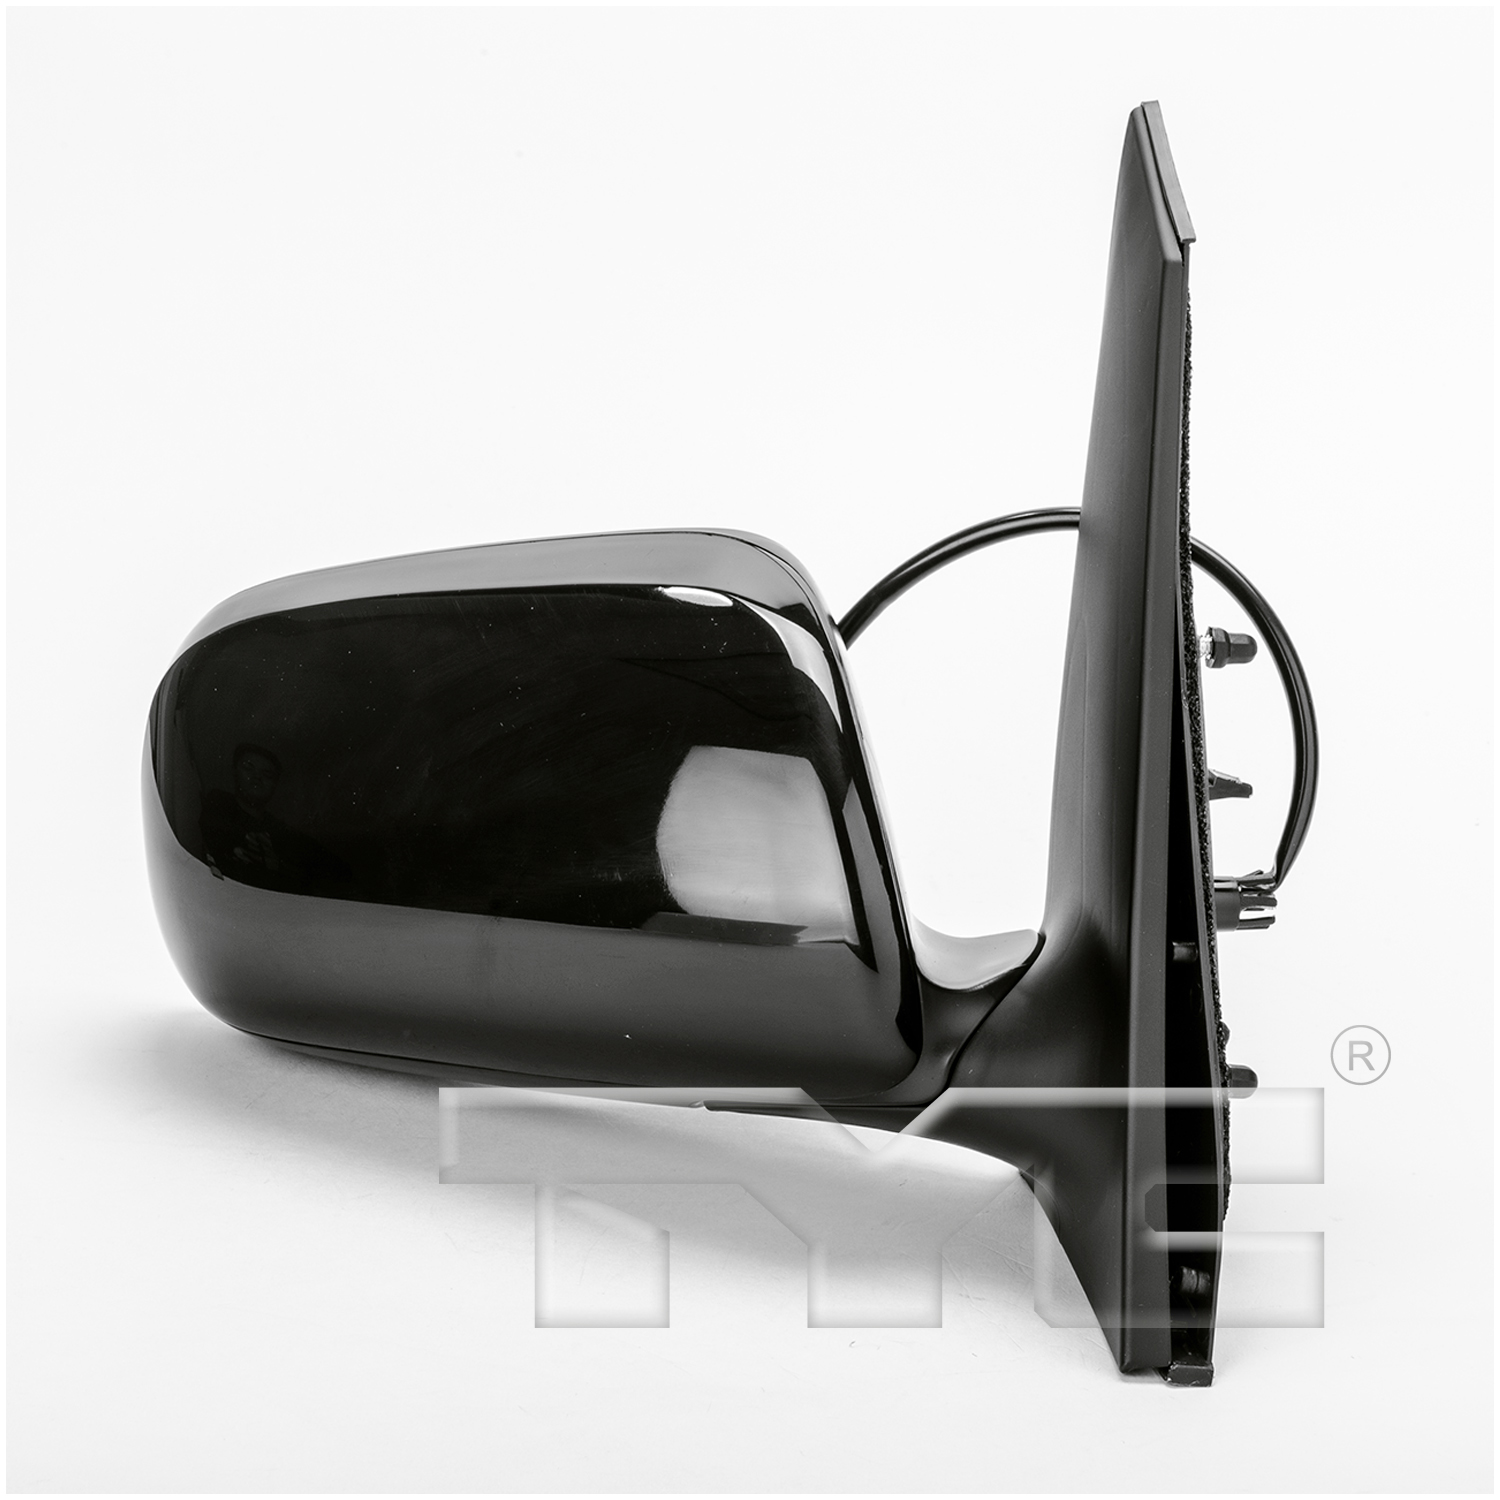 Aftermarket MIRRORS for TOYOTA - PRIUS, PRIUS,08-09,RT Mirror outside rear view